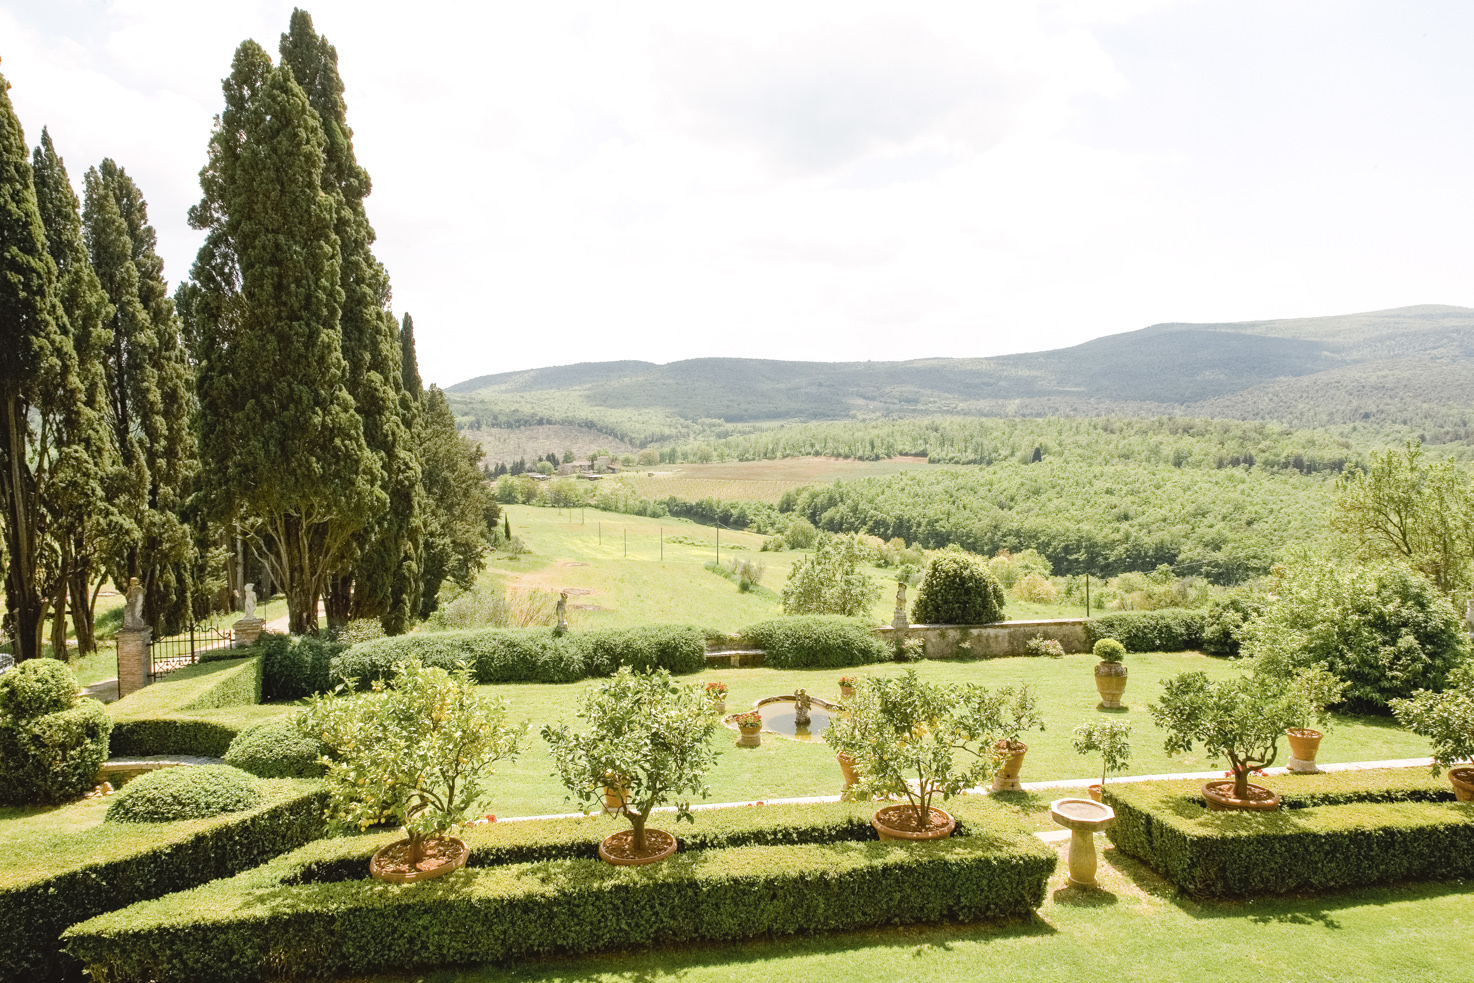 Gardens with view over the Tuscan hills